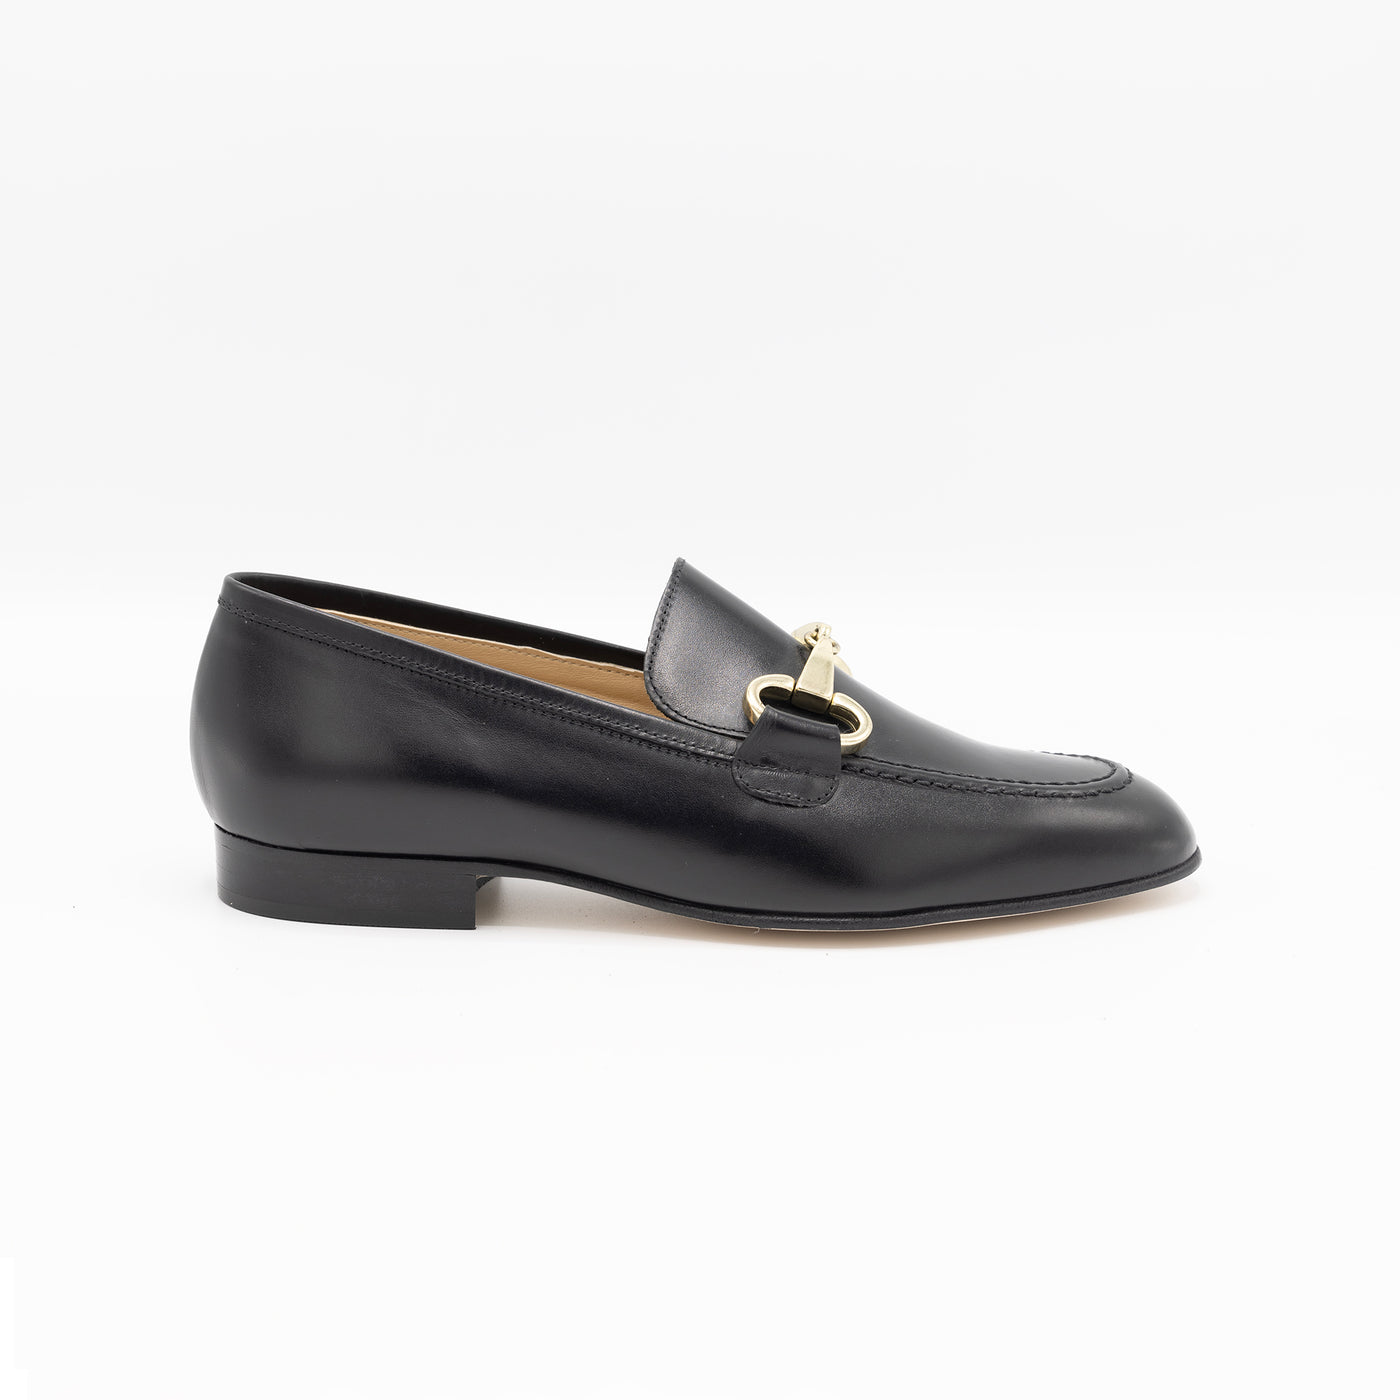 Classic horsebit loafer in black Leather. Set on leather soles and lined with calf leather.